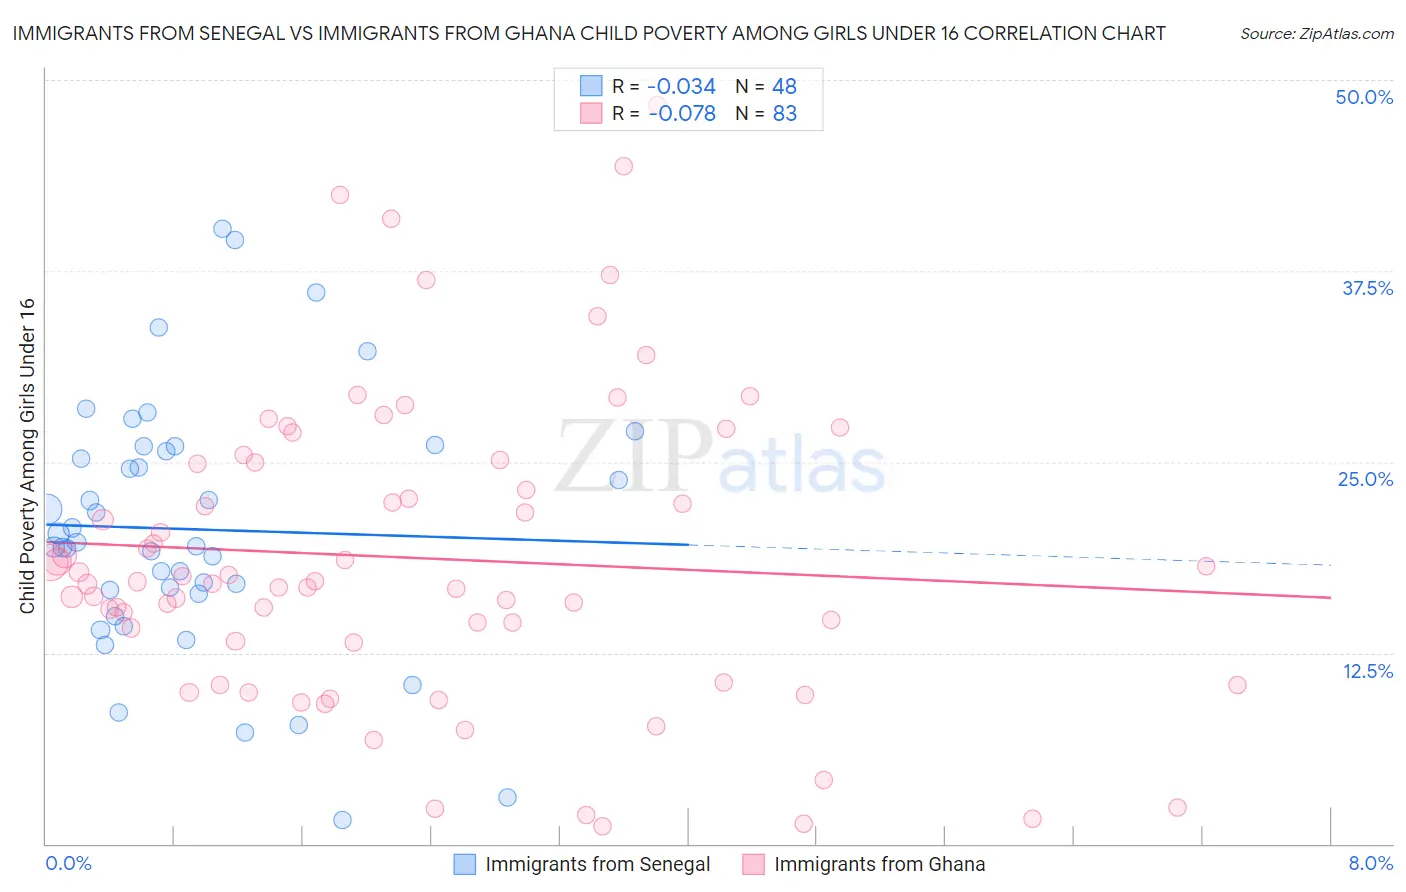 Immigrants from Senegal vs Immigrants from Ghana Child Poverty Among Girls Under 16